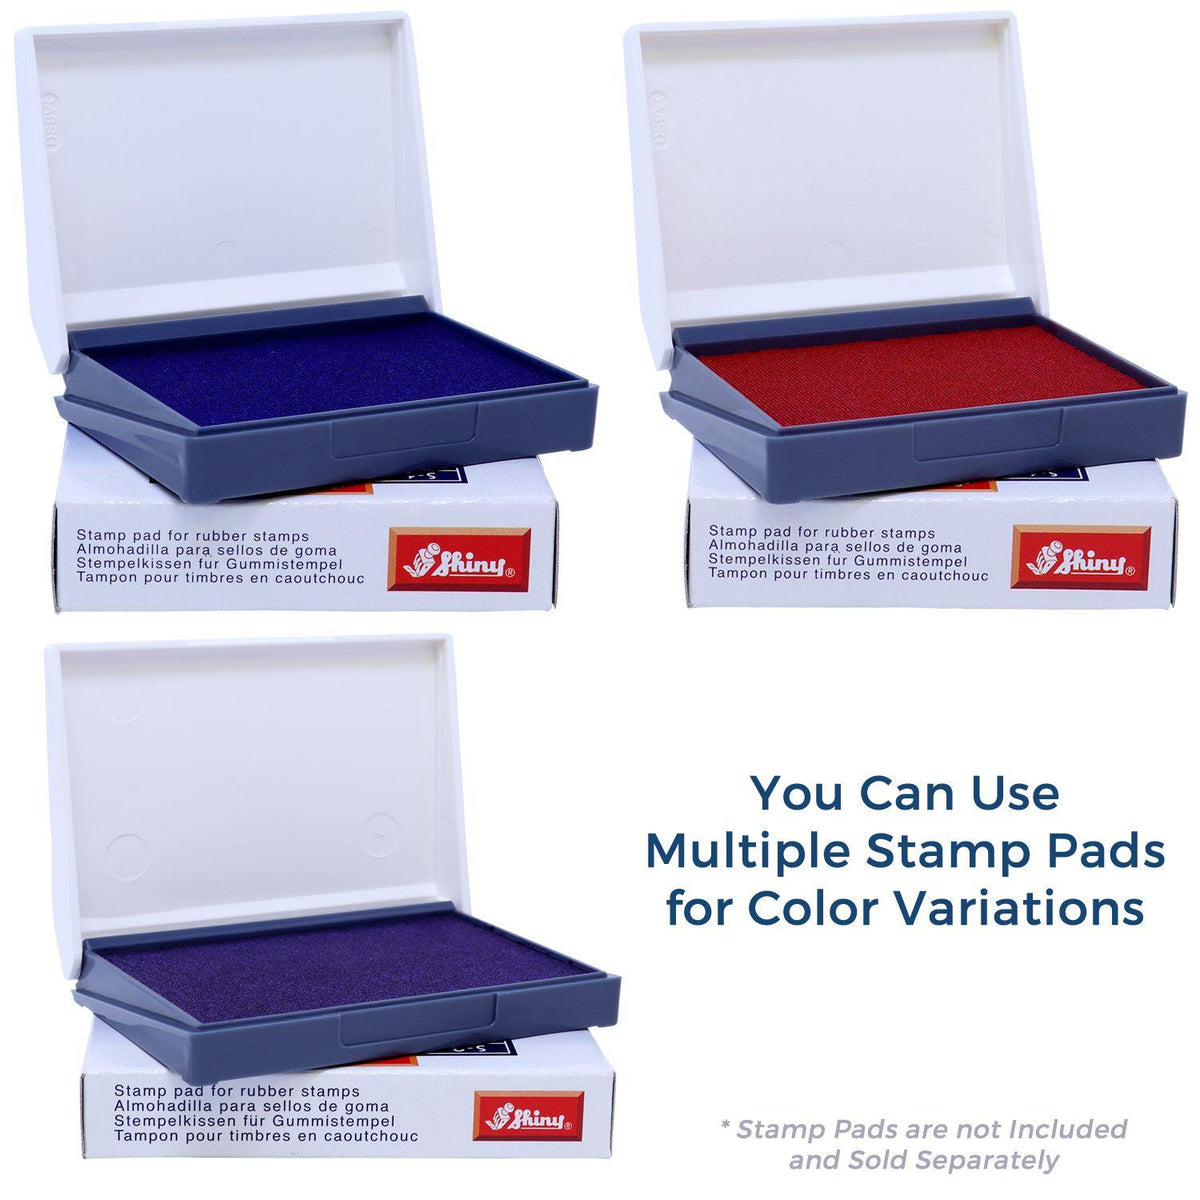 Stamp Pads for Advance Directive Rubber Stamp Available